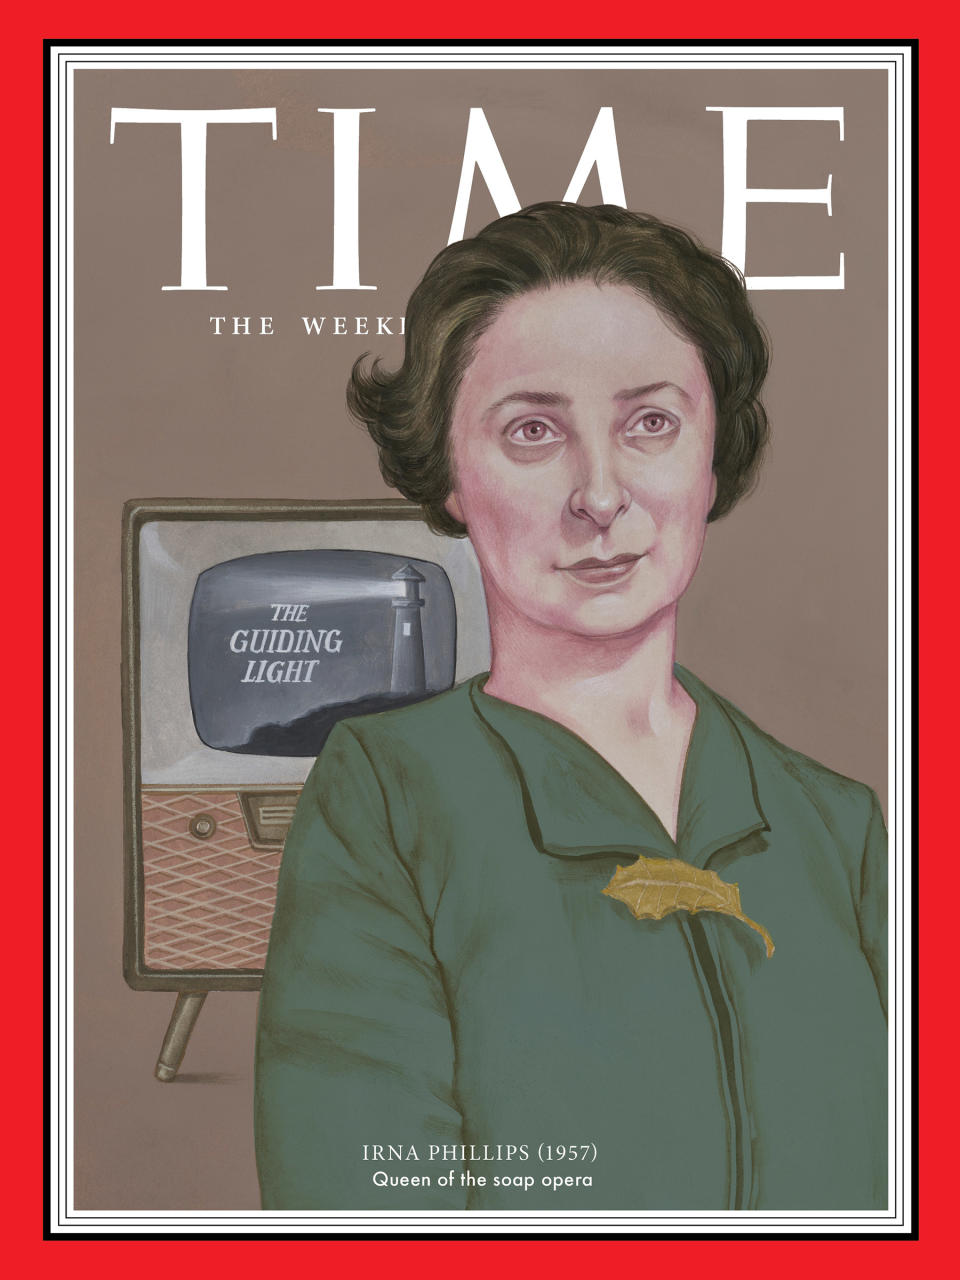 Buy the cover art→ | Illustration by Anita Kunz for TIME; NBCU Photo Bank/Getty